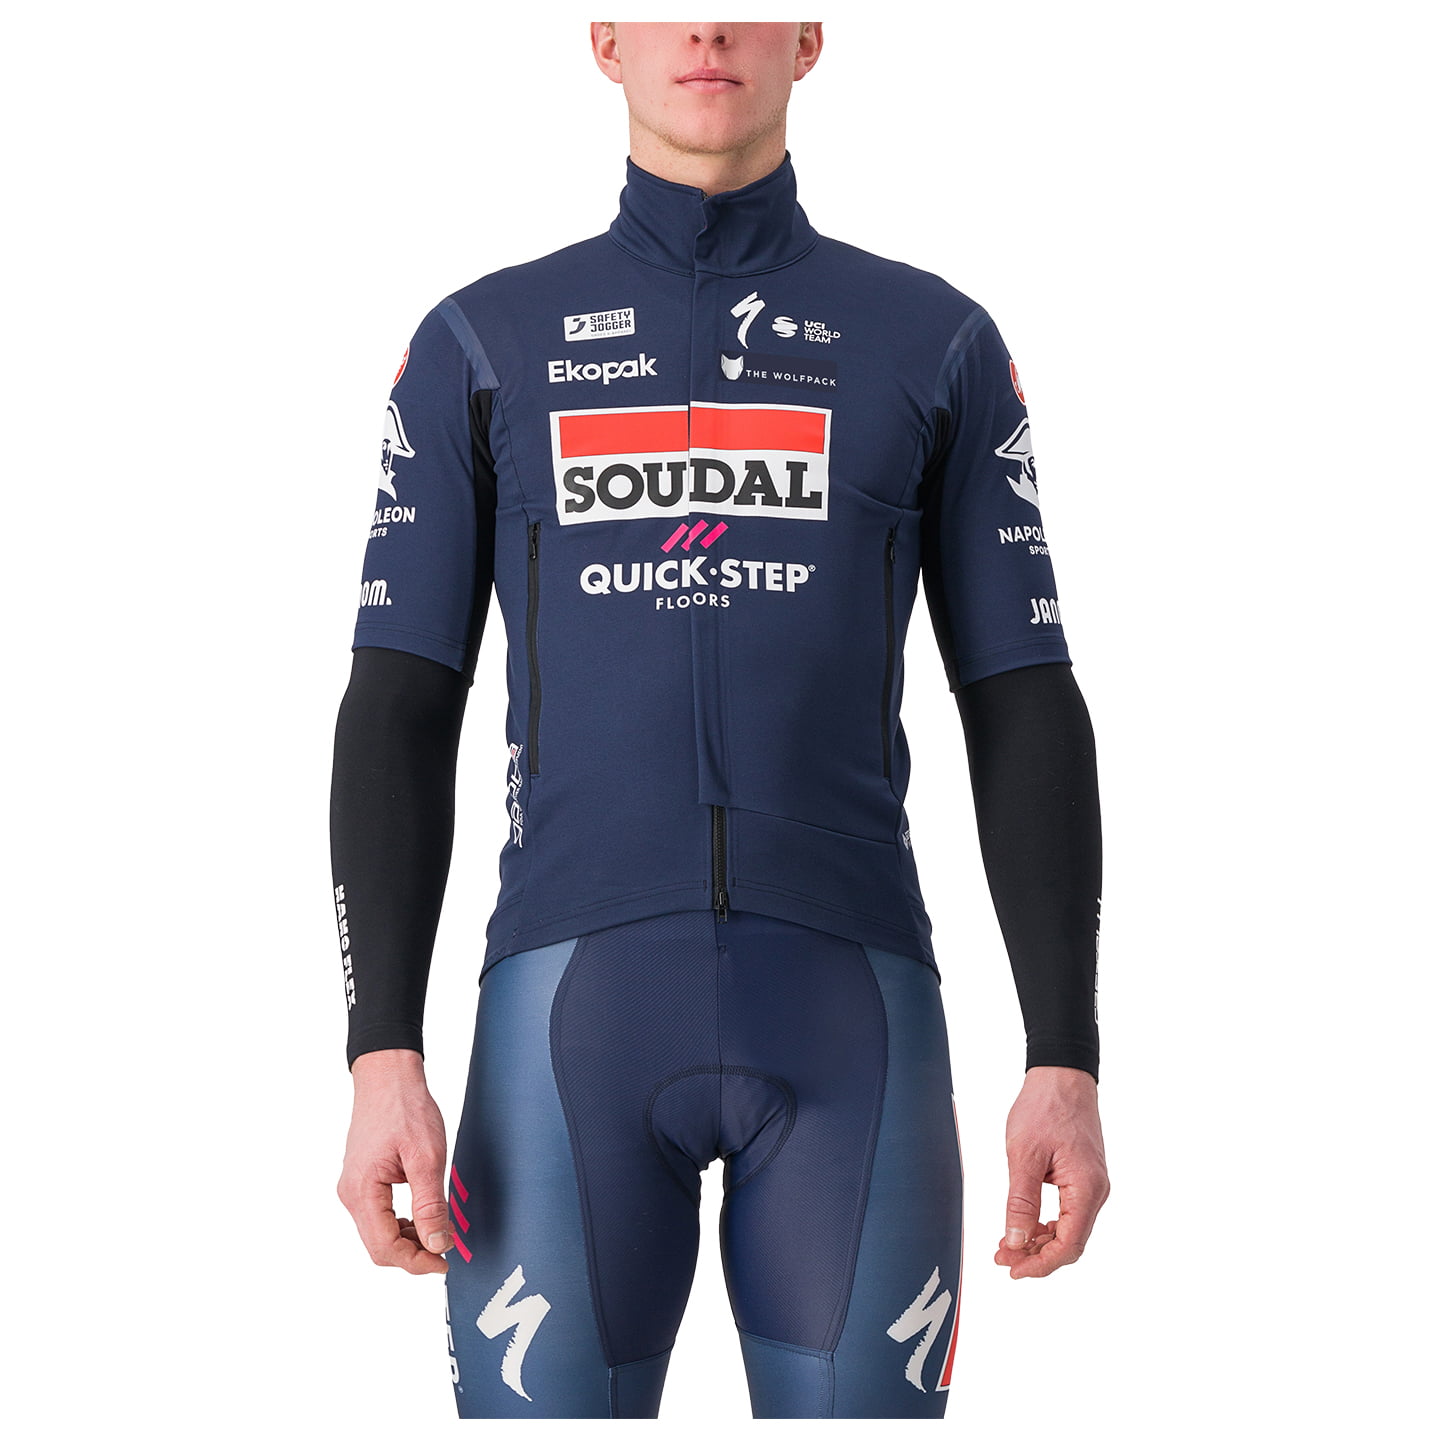 SOUDAL QUICK-STEP Short Sleeve 2024 Light Jacket, for men, size S, Cycle jacket, Cycling clothing